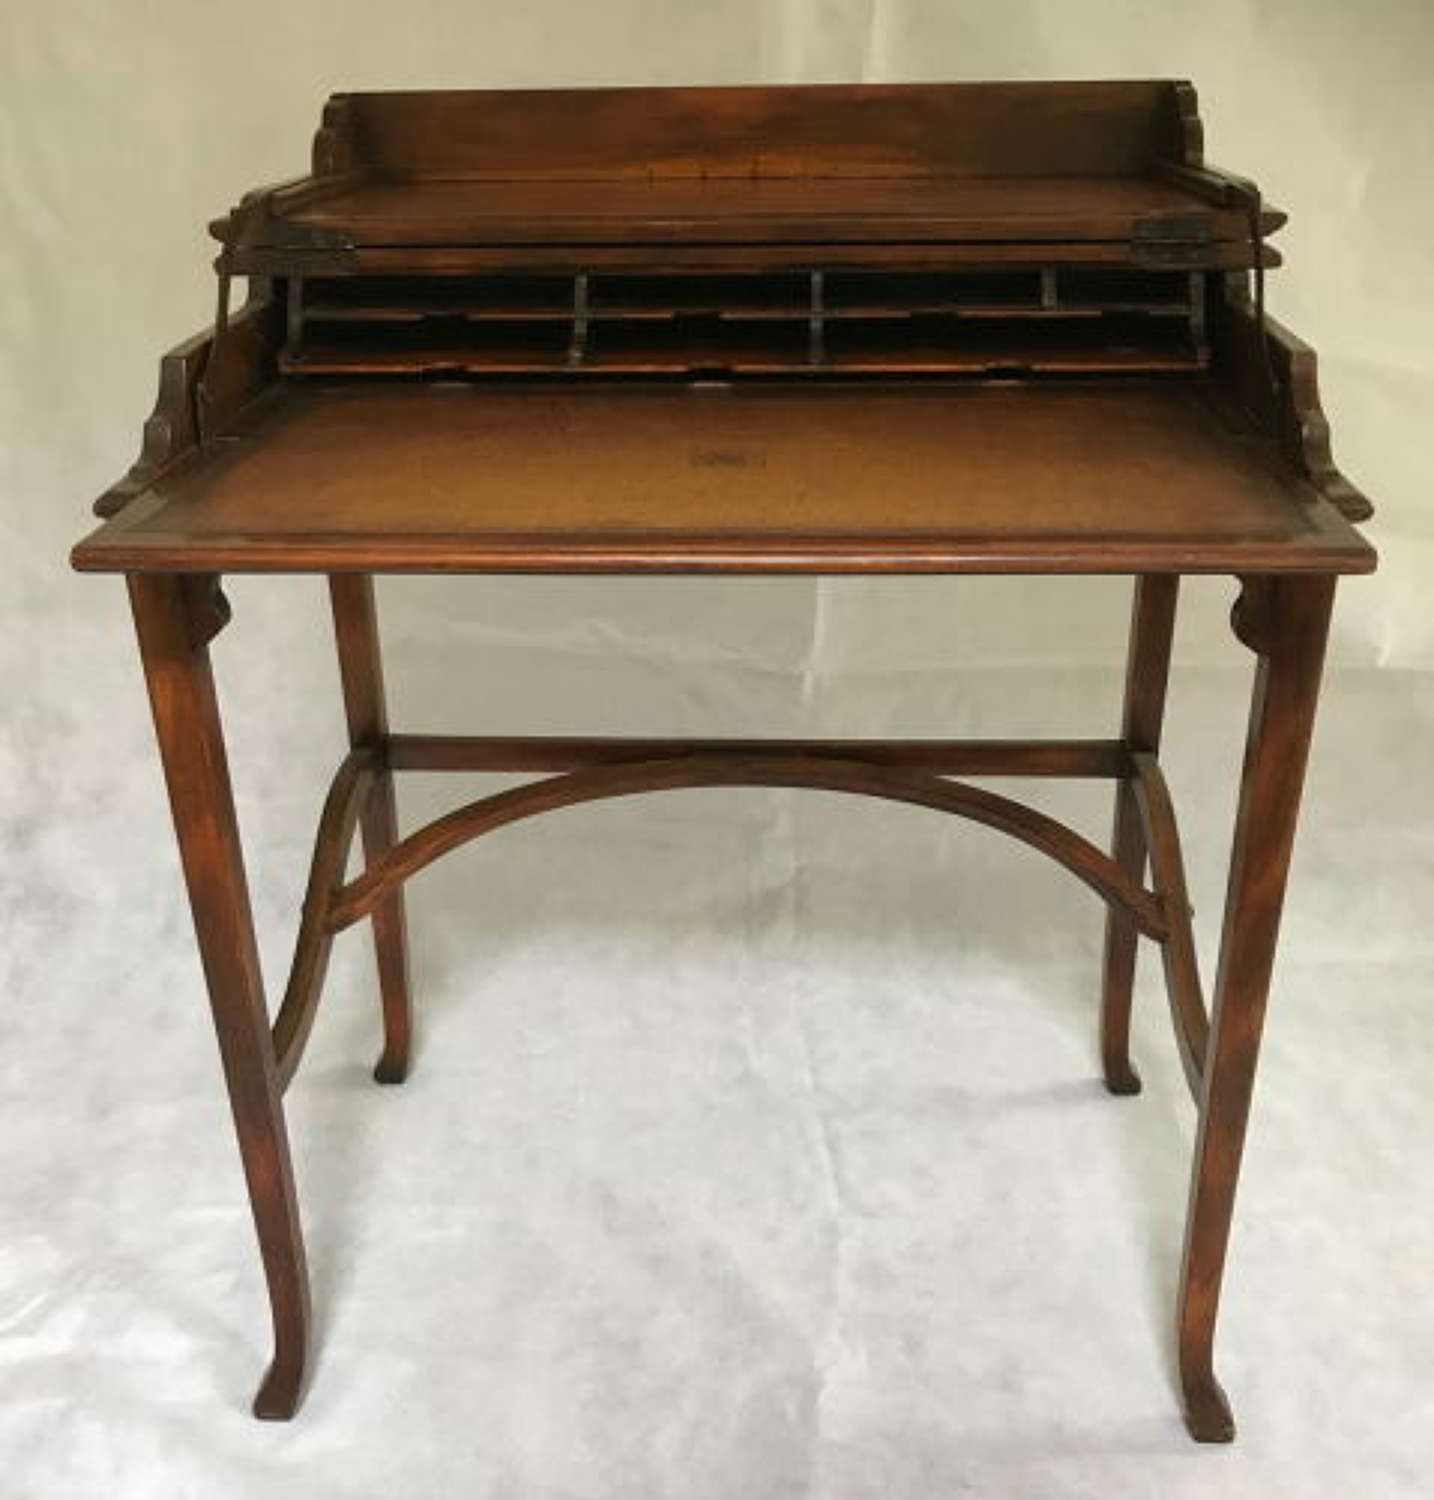 Very Attractive Edwardian Desk / Table